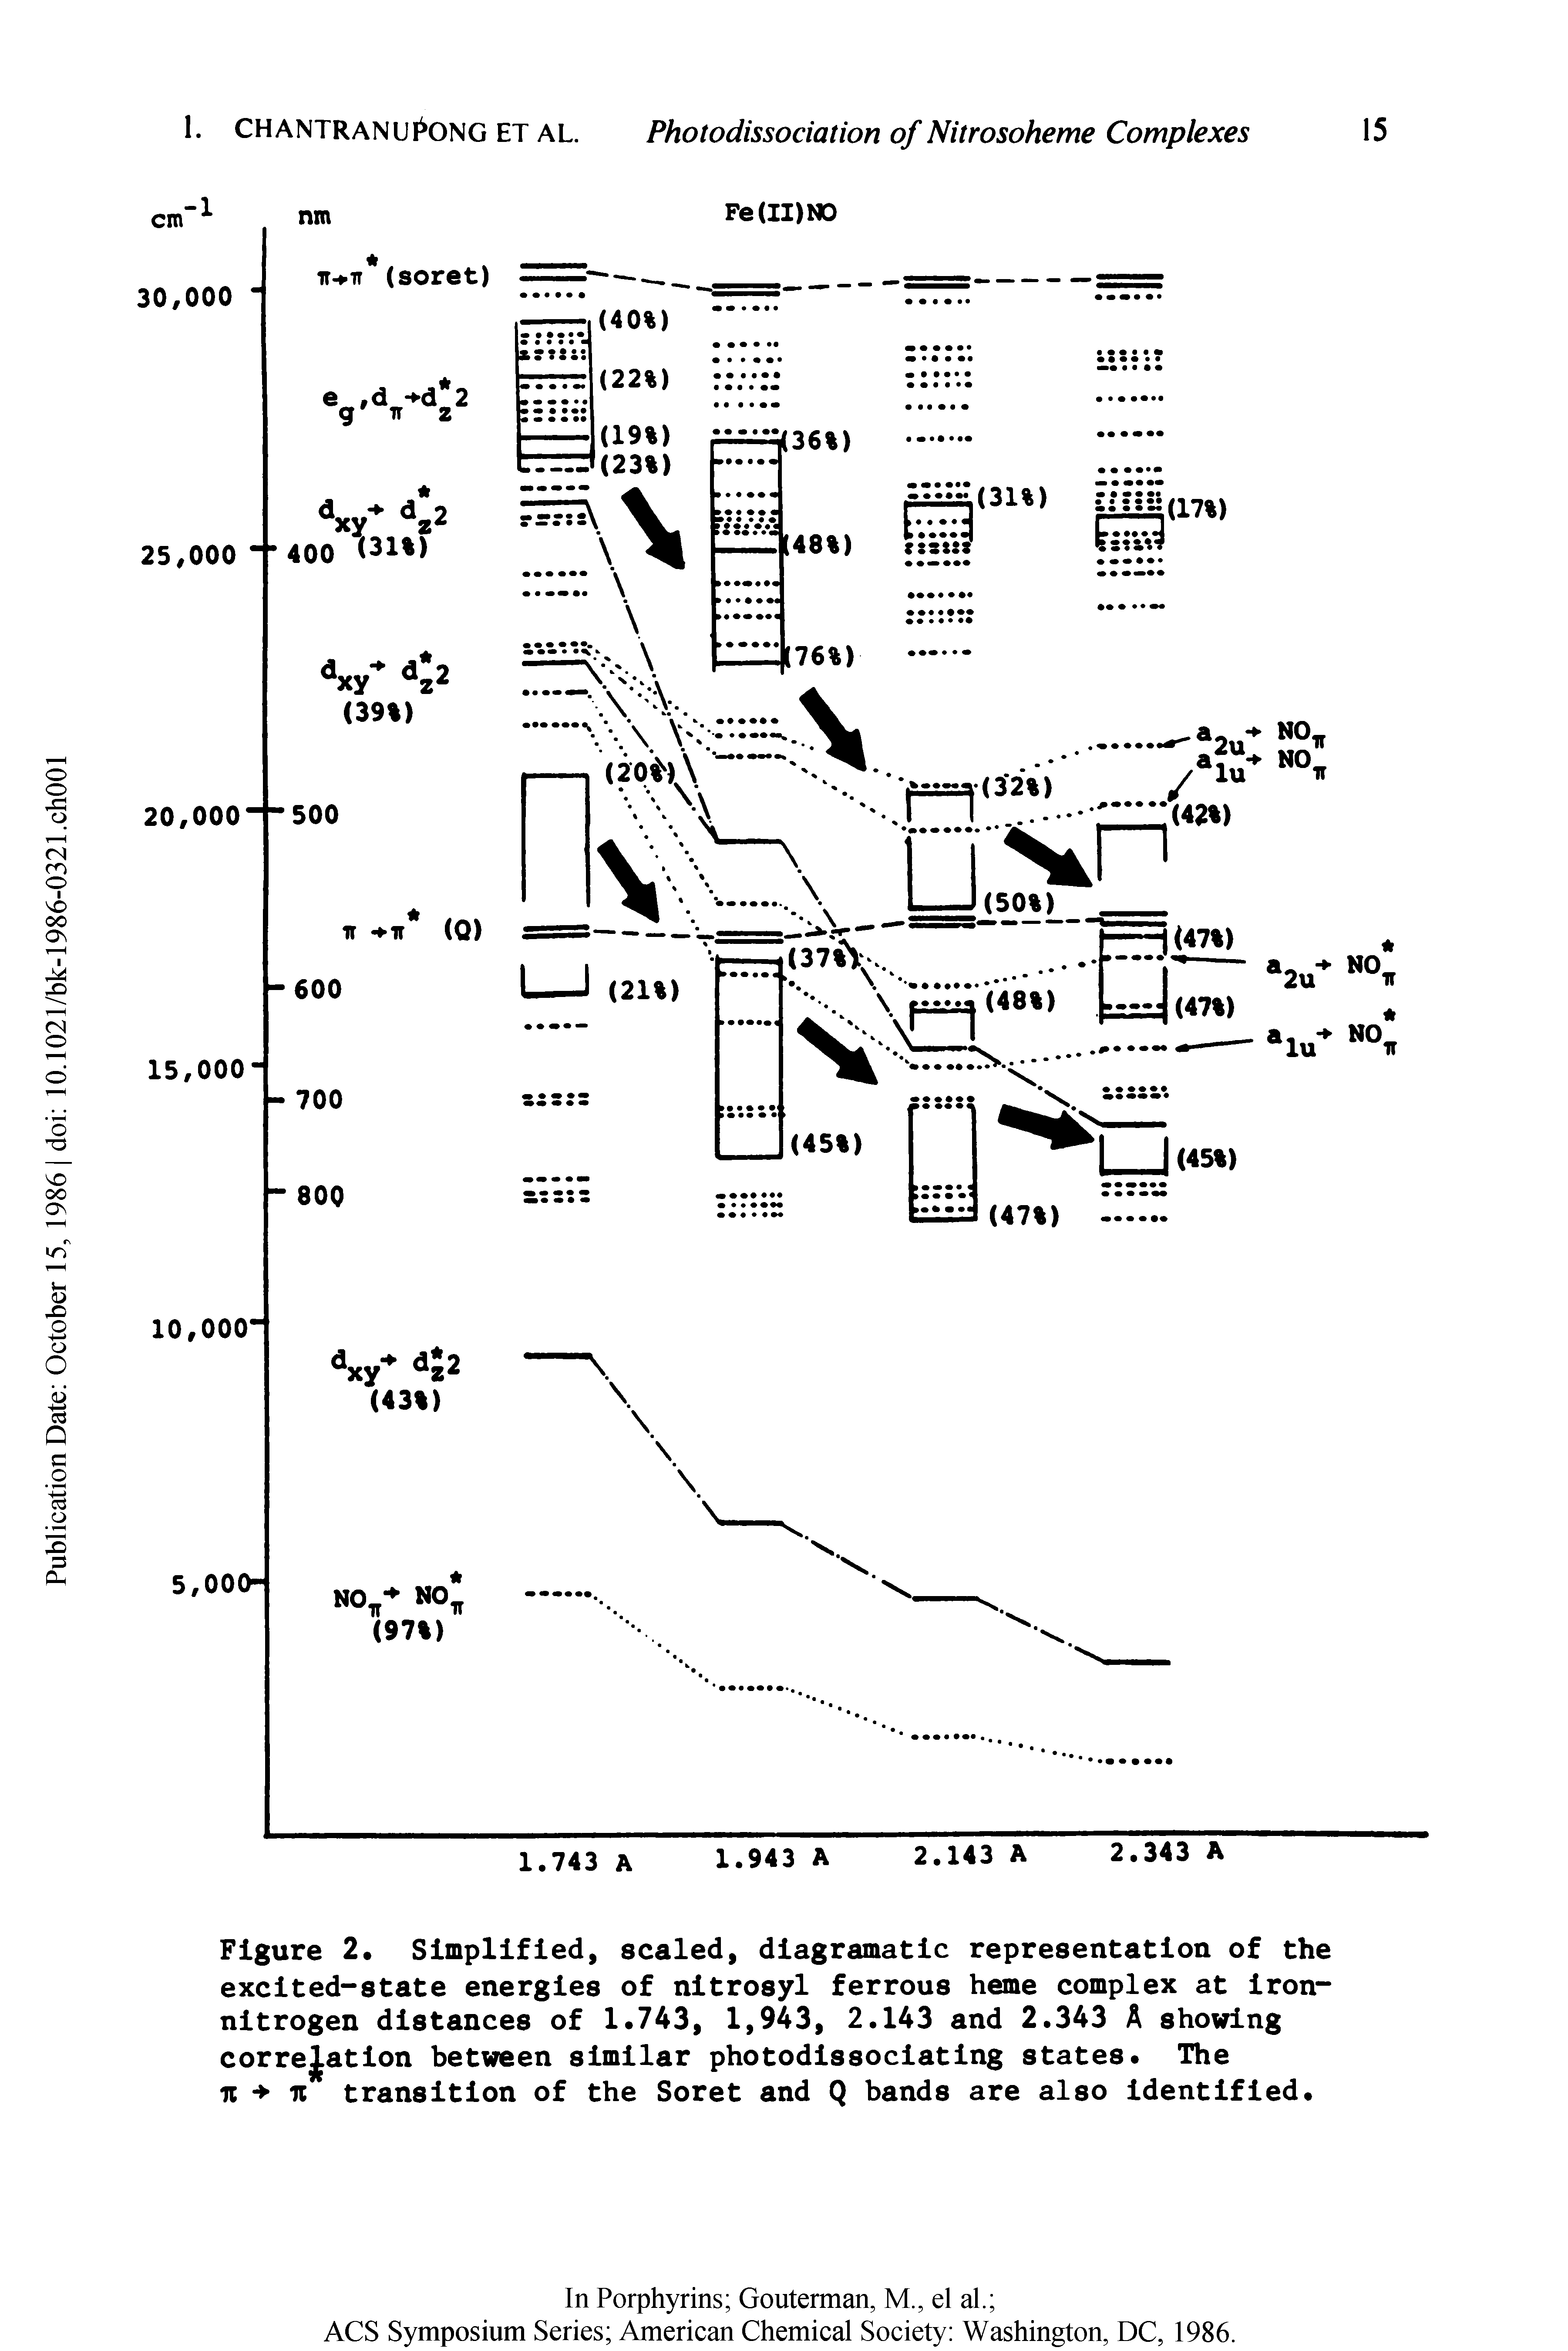 Figure 2. Simplified, scaled, dlagramatlc representation of the excited-state energies of nitrosyl ferrous heme complex at iron-nitrogen distances of 1.743, 1,943, 2.143 and 2.343 A showing correlation between similar photodissociating states. The 71 71 transition of the Soret and Q bands are also identified.